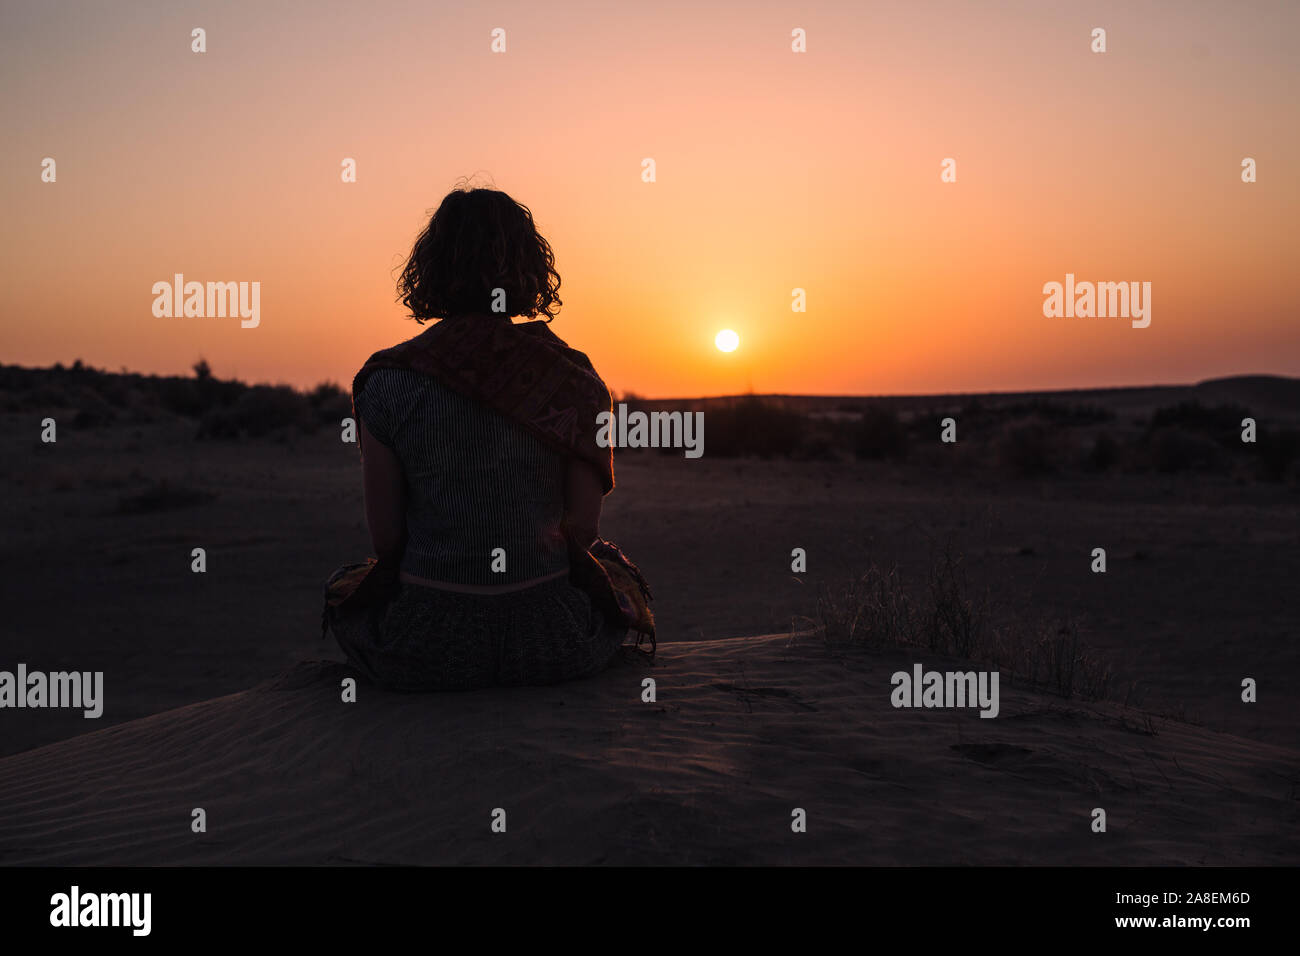 Woman sits to admire the sunset over the dunes, Thar Desert, Jaisalmer, India Stock Photo